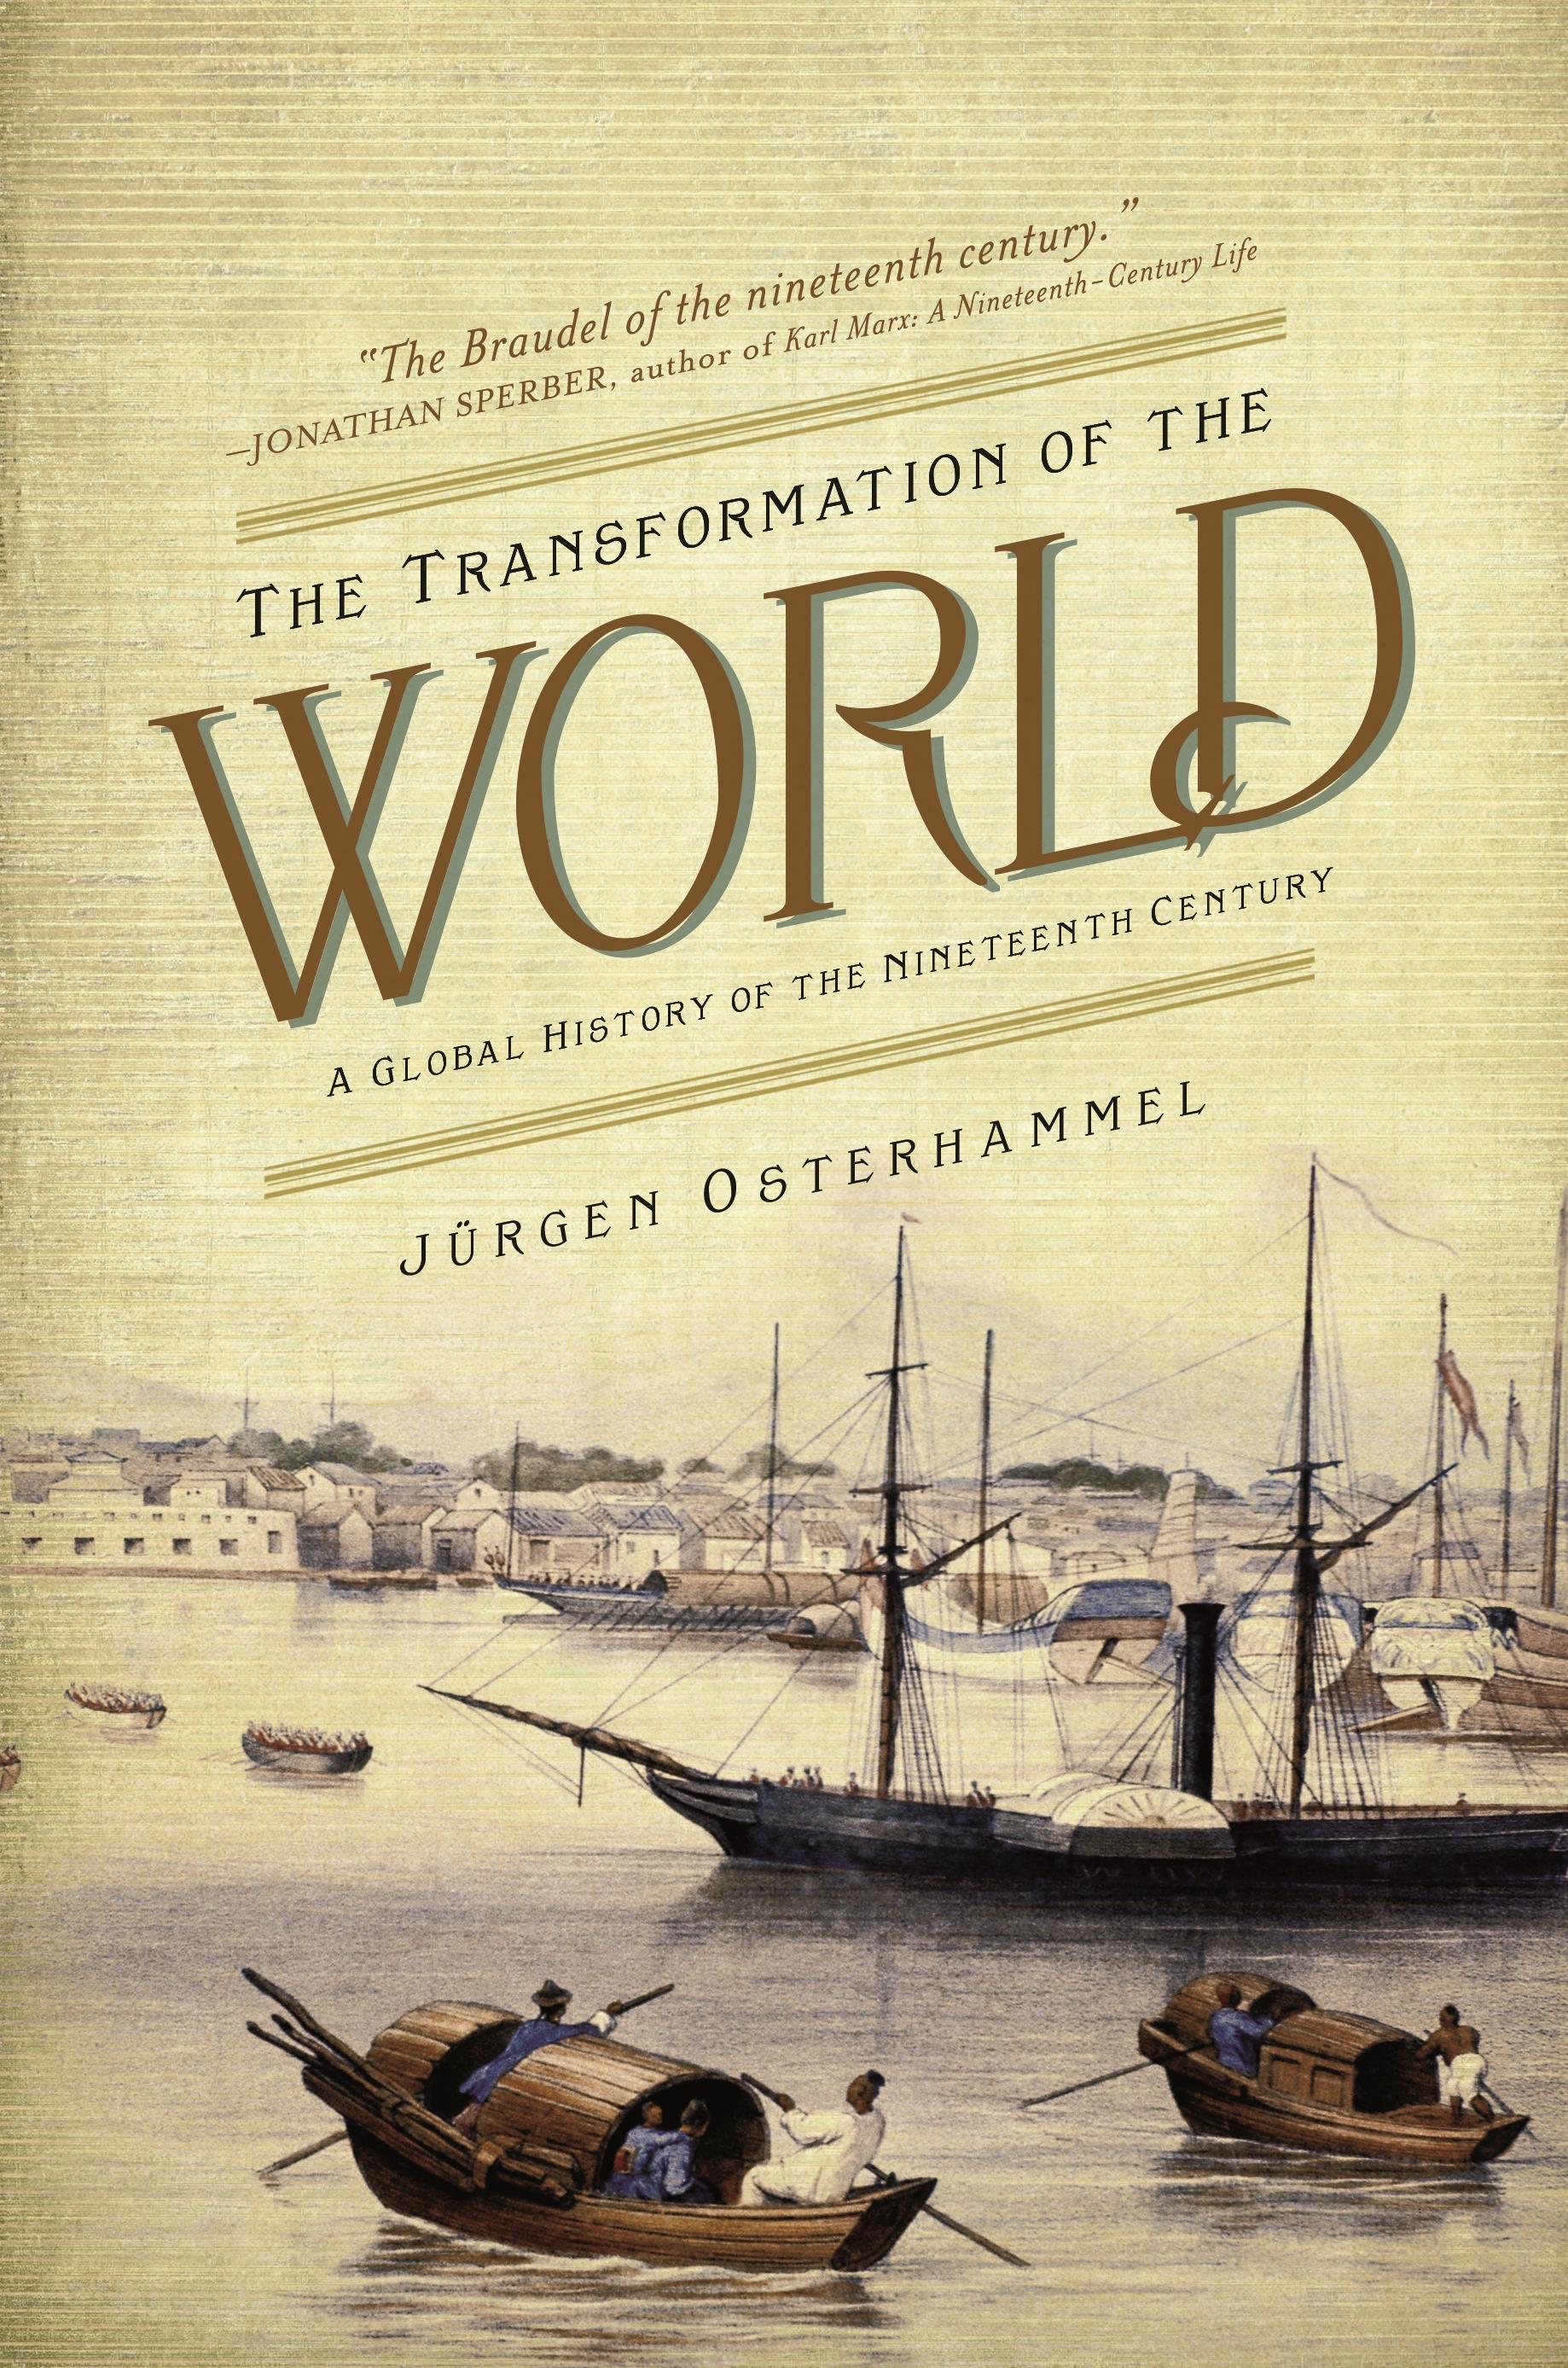 THE TRANSFORMATION OF THE WORLD PB